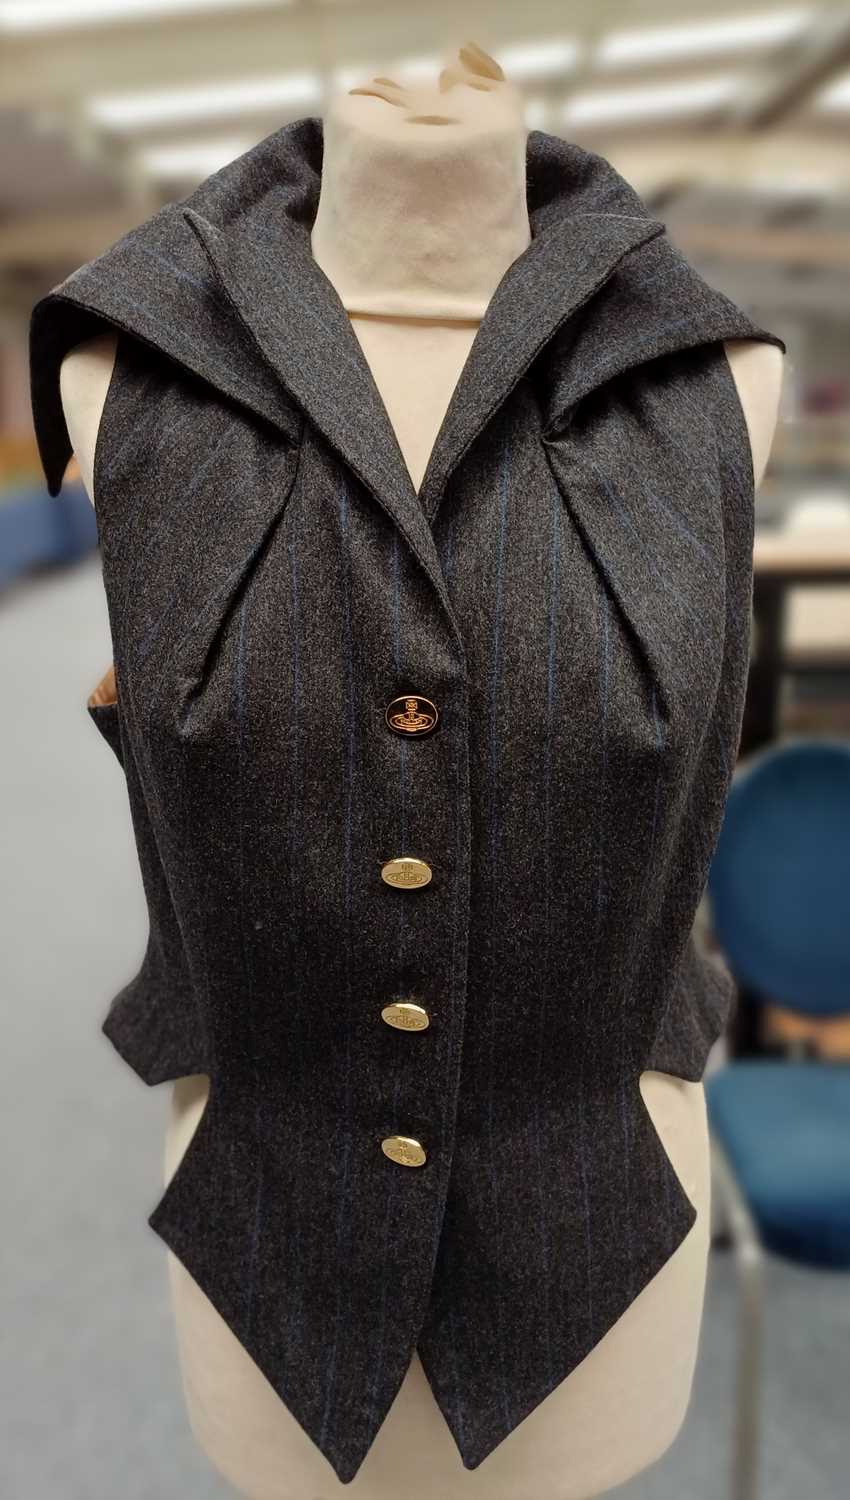 Vivienne Westwood Ingles Waistcoat, Spring/Summer Café Society Collection 1994, in grey and blue - Image 14 of 14